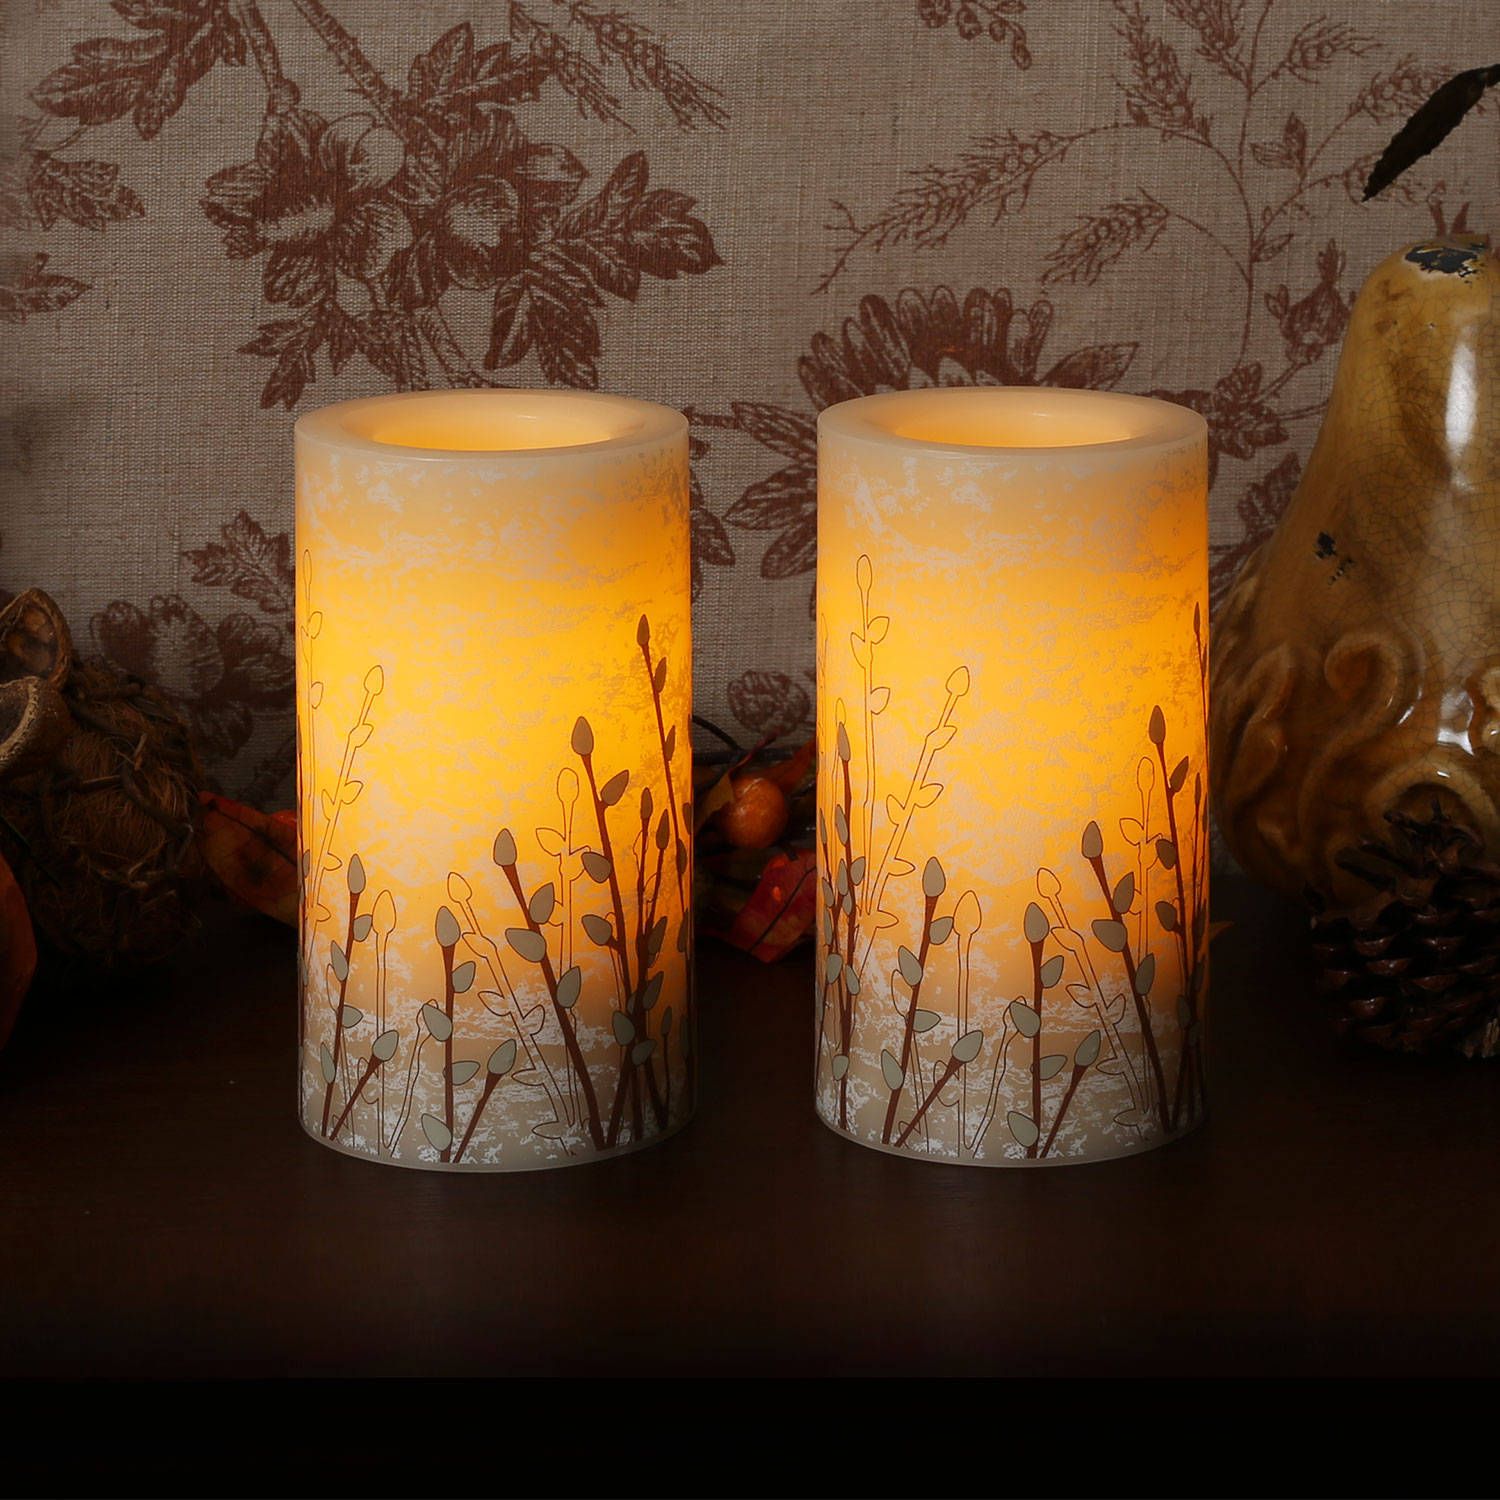 How To Decorate With Flameless Candles